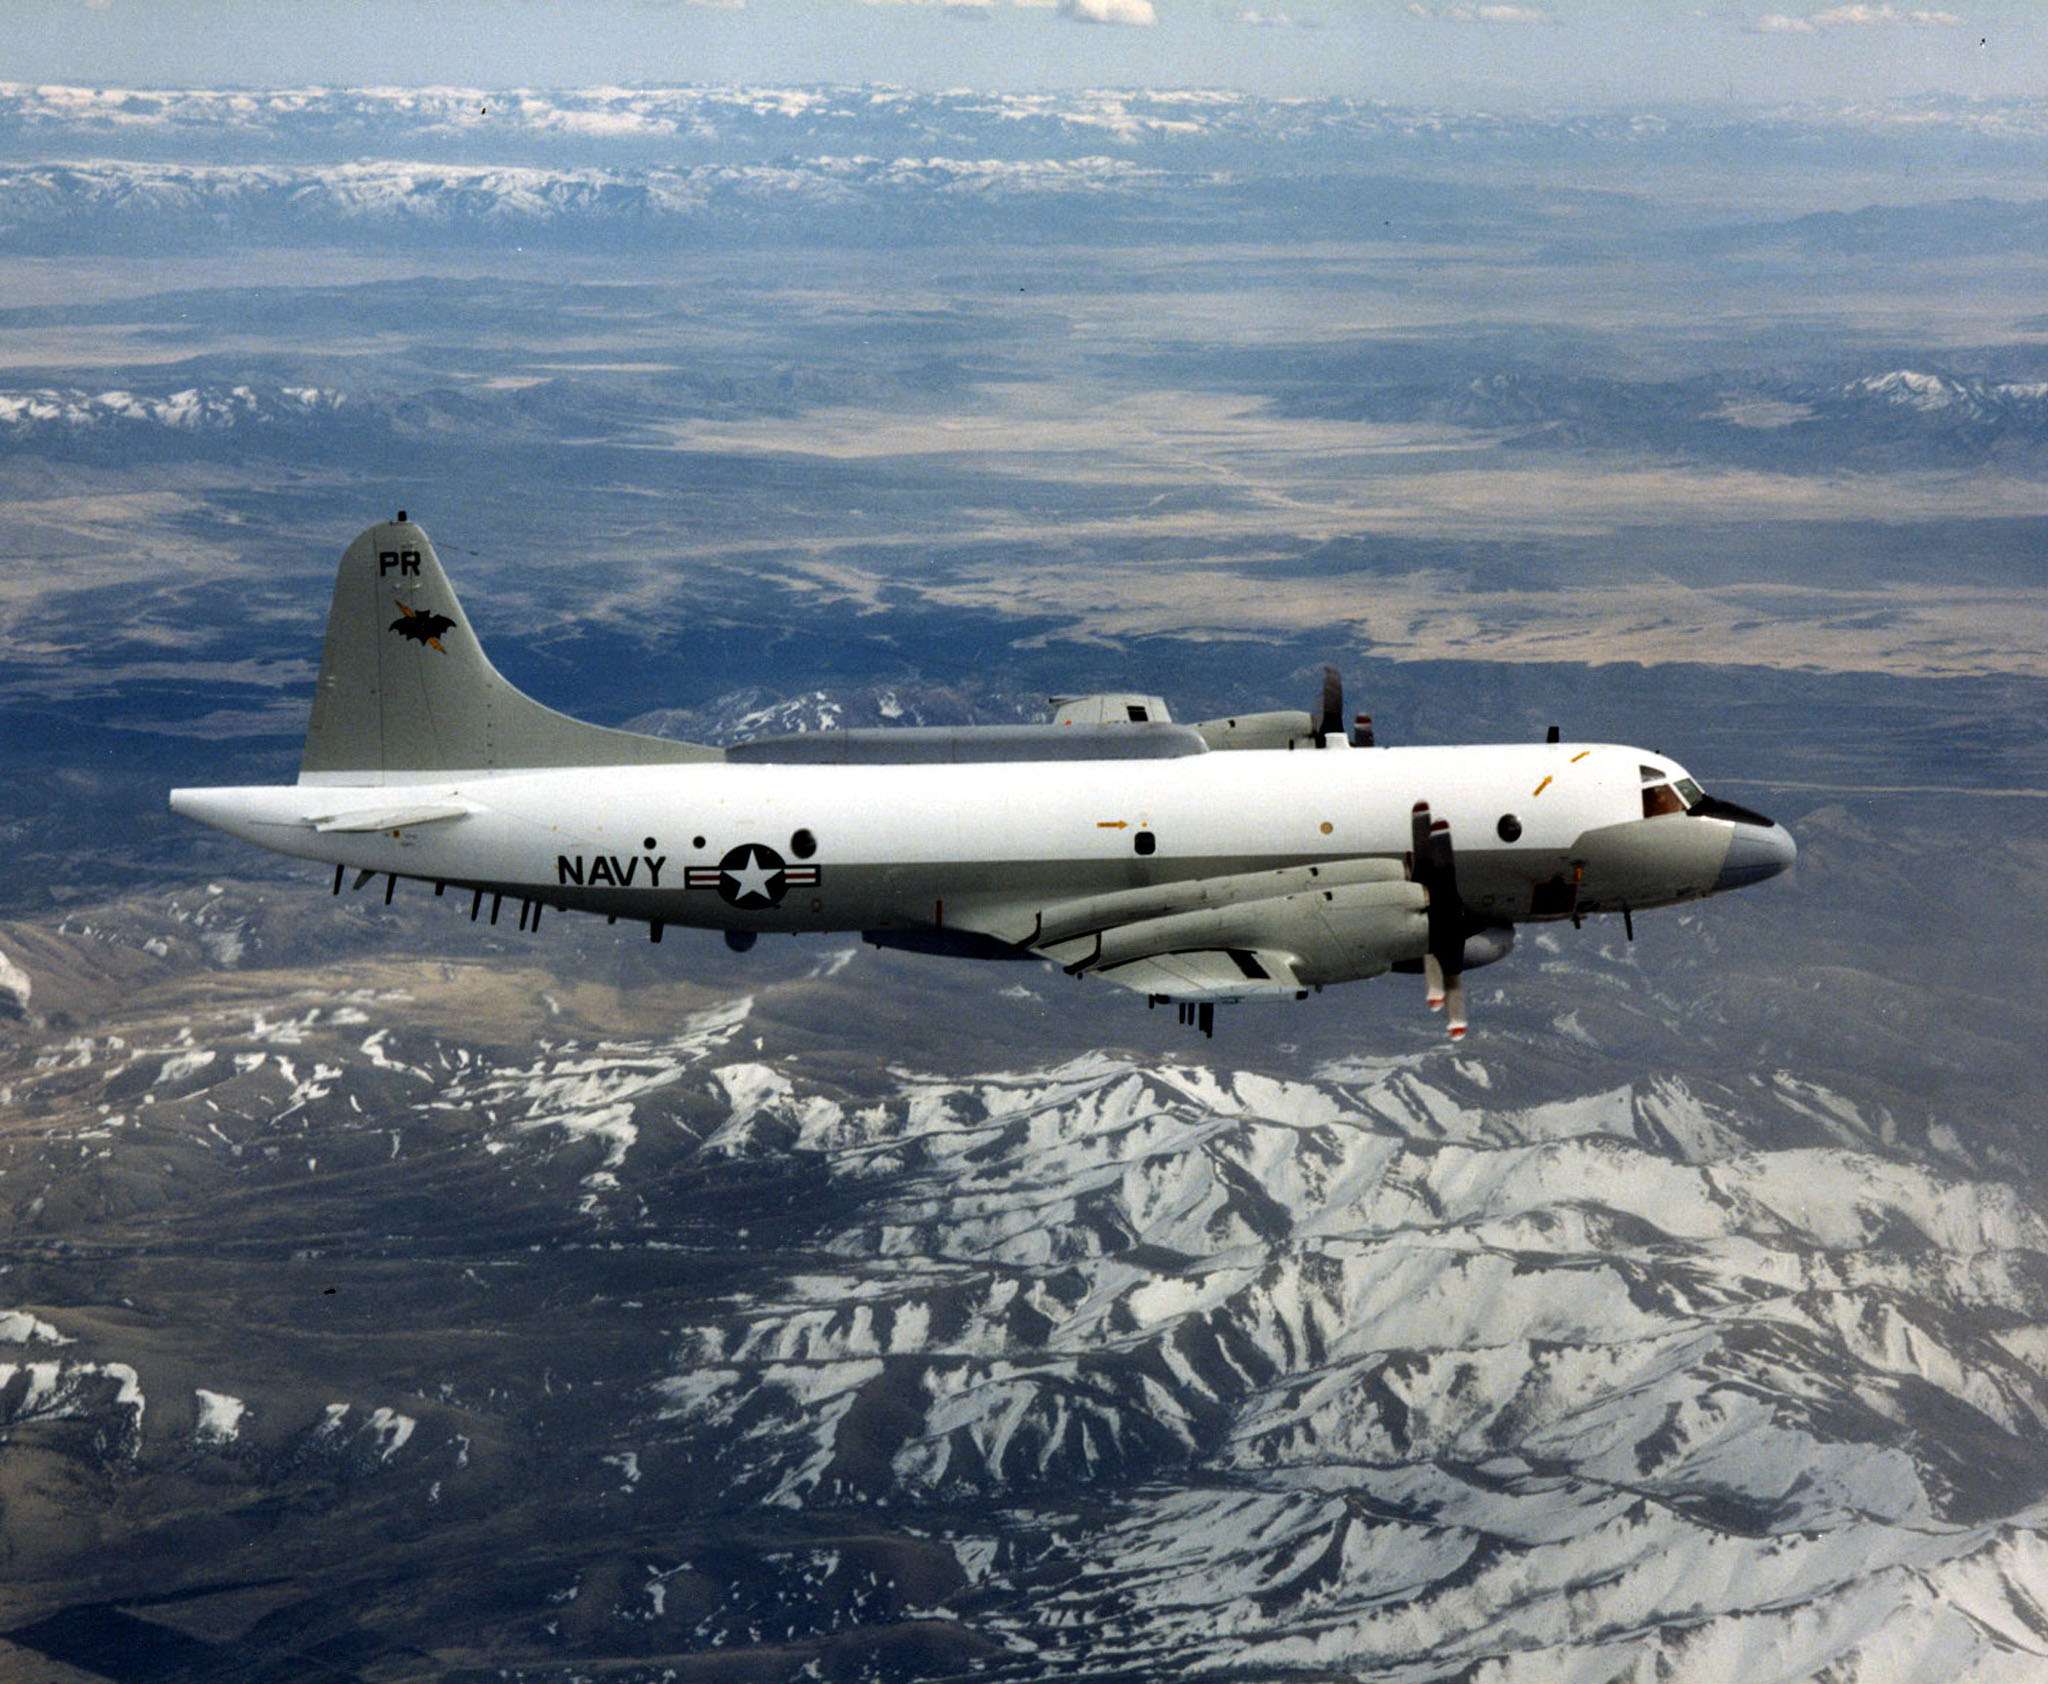 A US Navy EP-3E Aries II reconnaissance plane identical to one that made an emergency landing on Hainan on April 1, 2001. Photo: Reuters